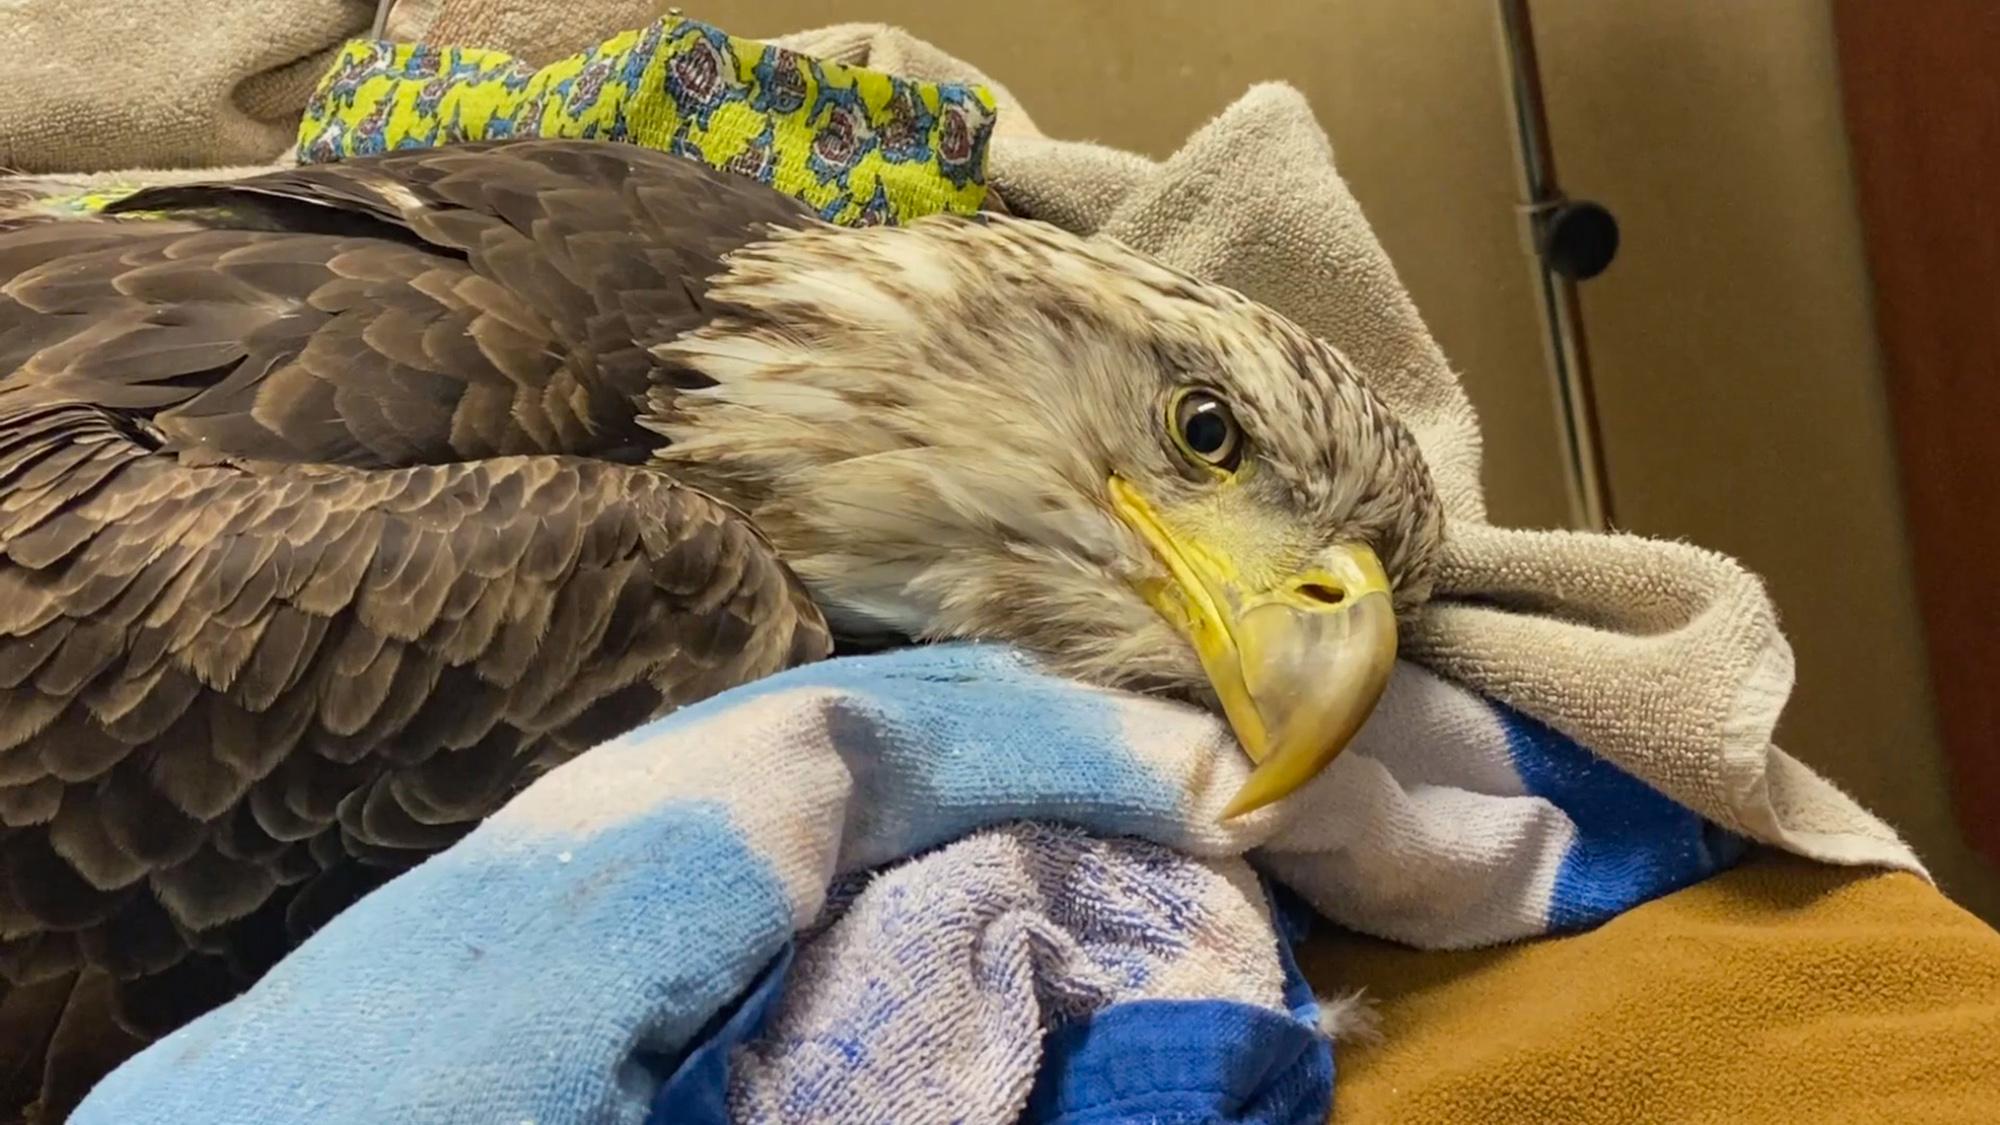 Read more about the article WINGING IT: Bald Eagle Shot By Hunters Takes To The Air Again In Amazing Slow-Mo Video After Life Saving Surgery